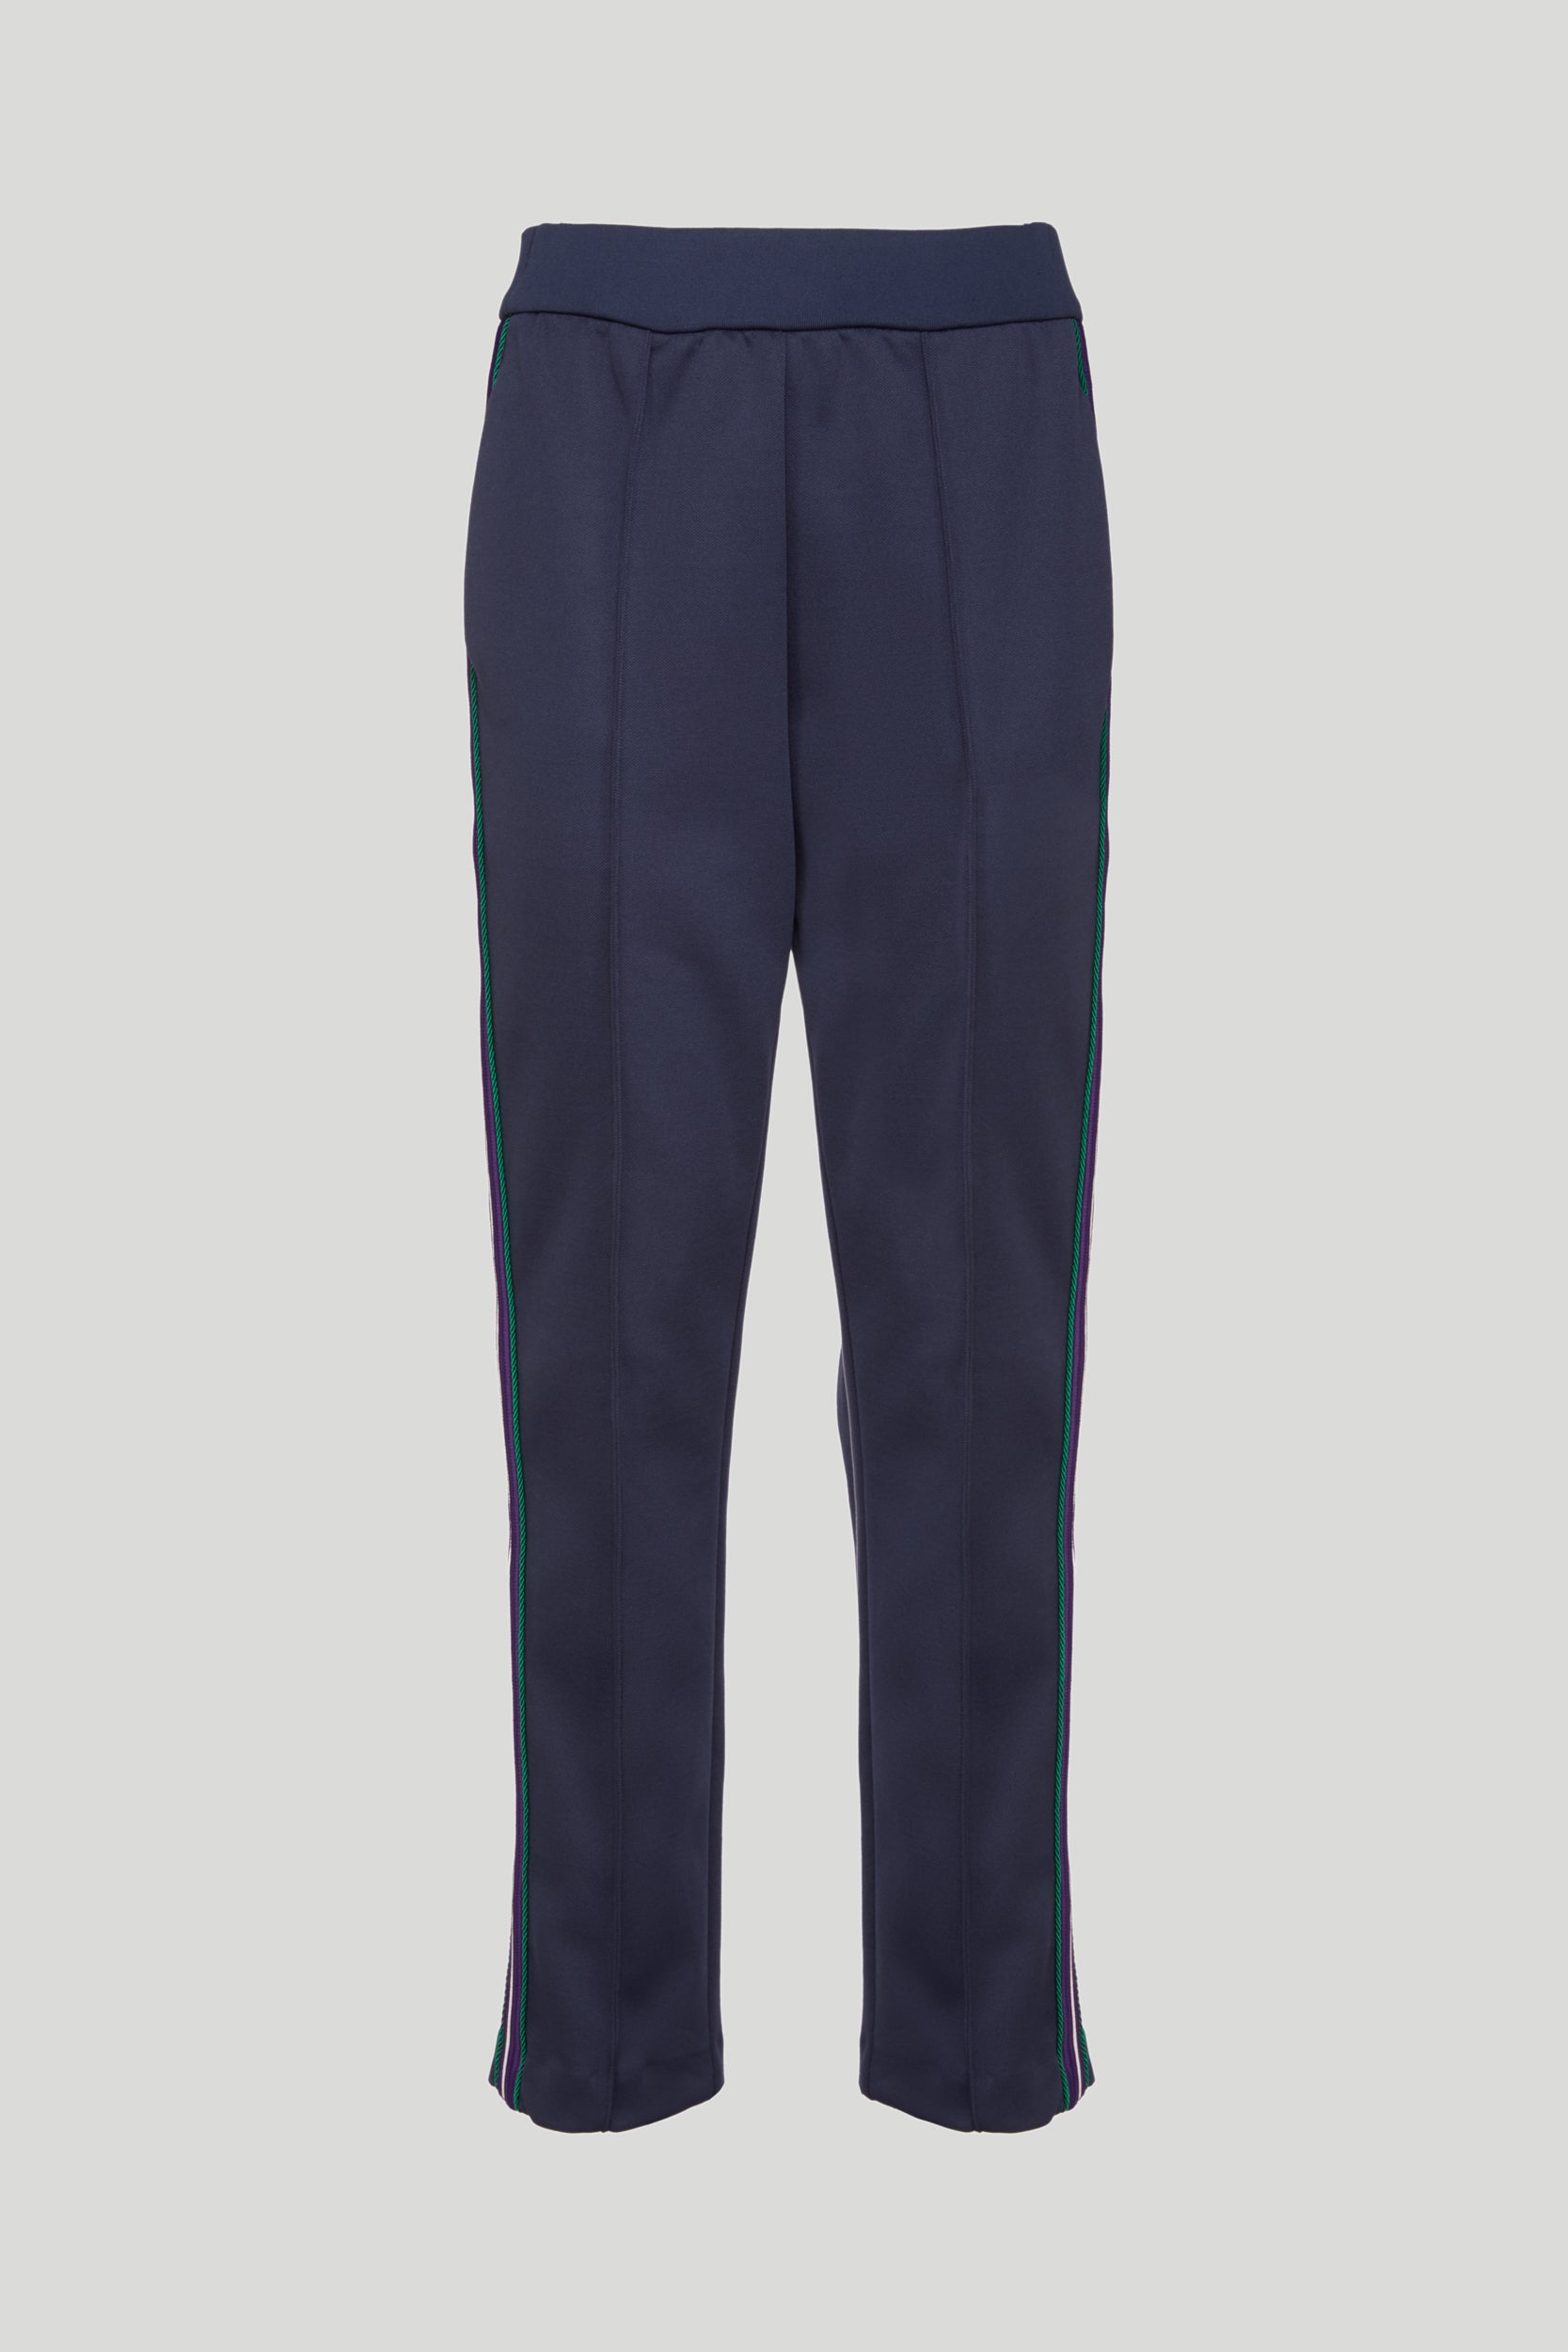 PINKO Blue Trousers with Line on the Side